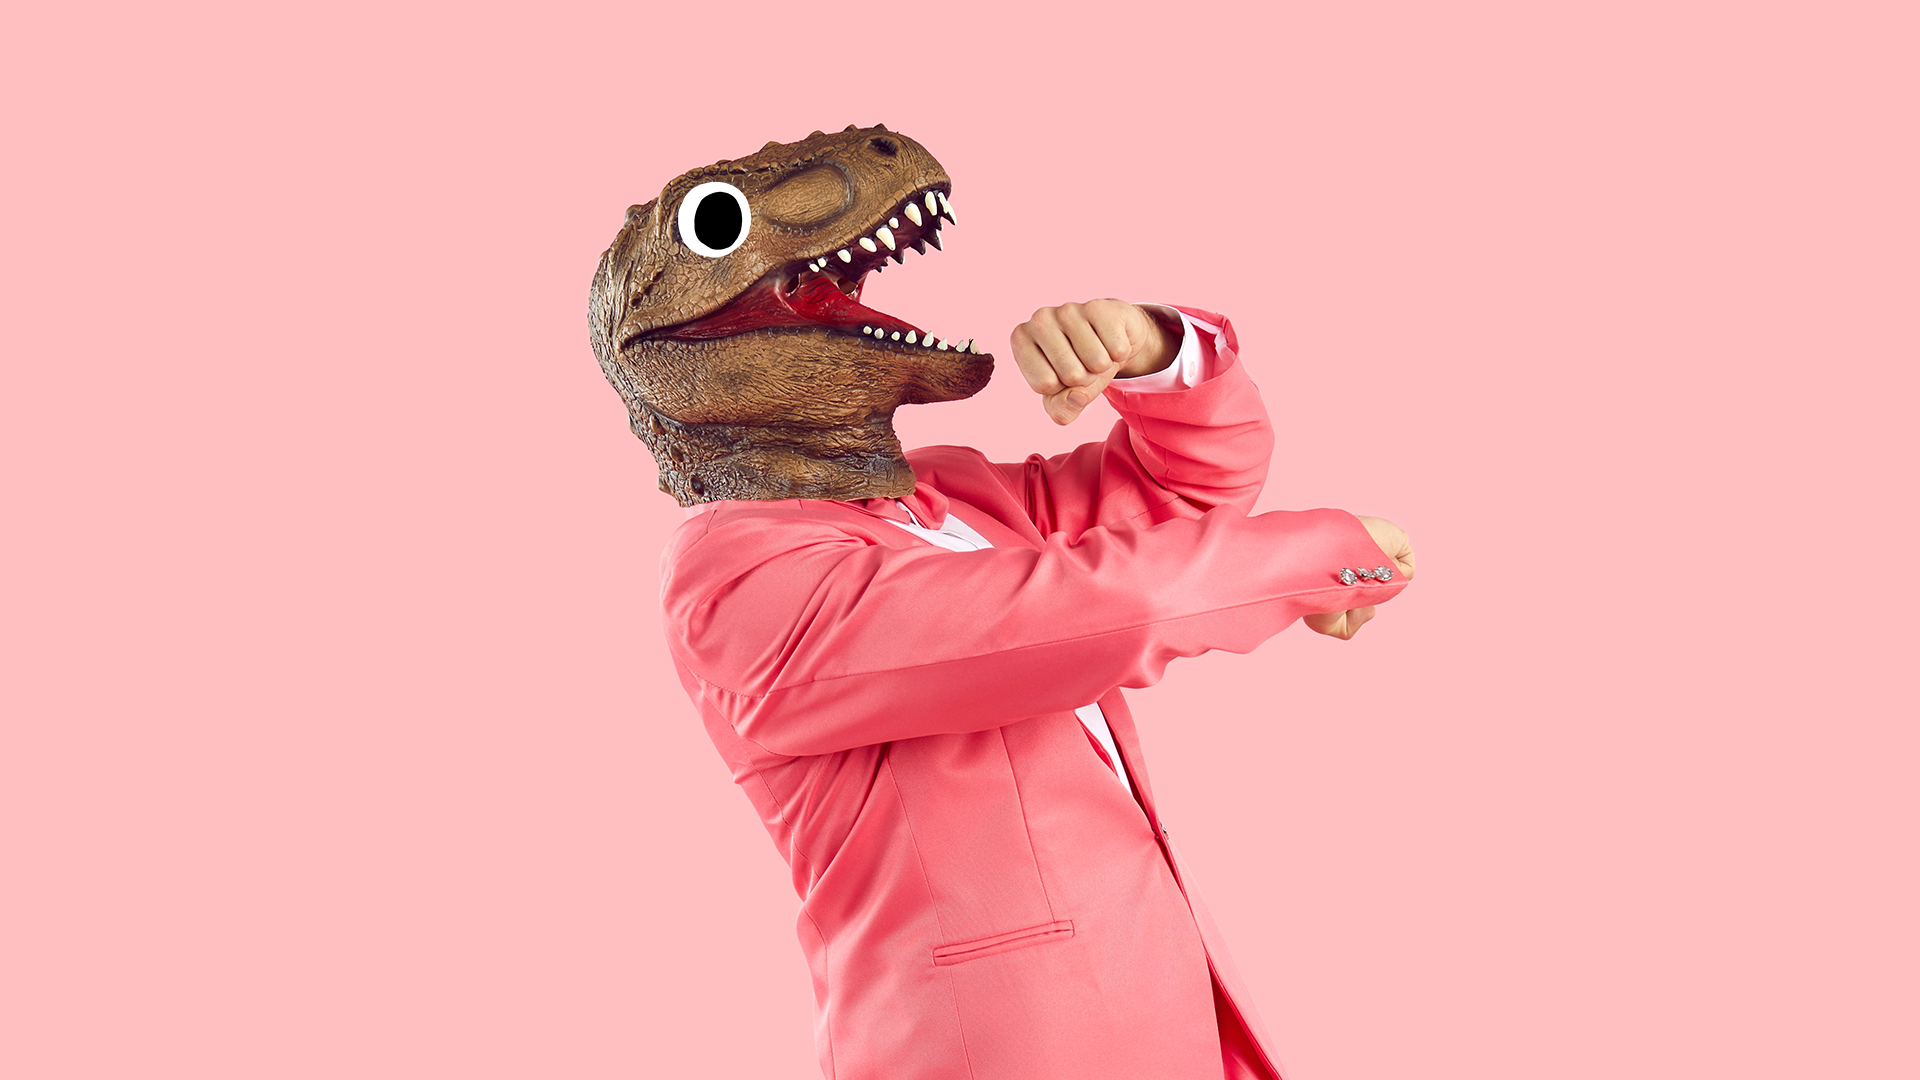 A man in a T-rex mask does a silly dance